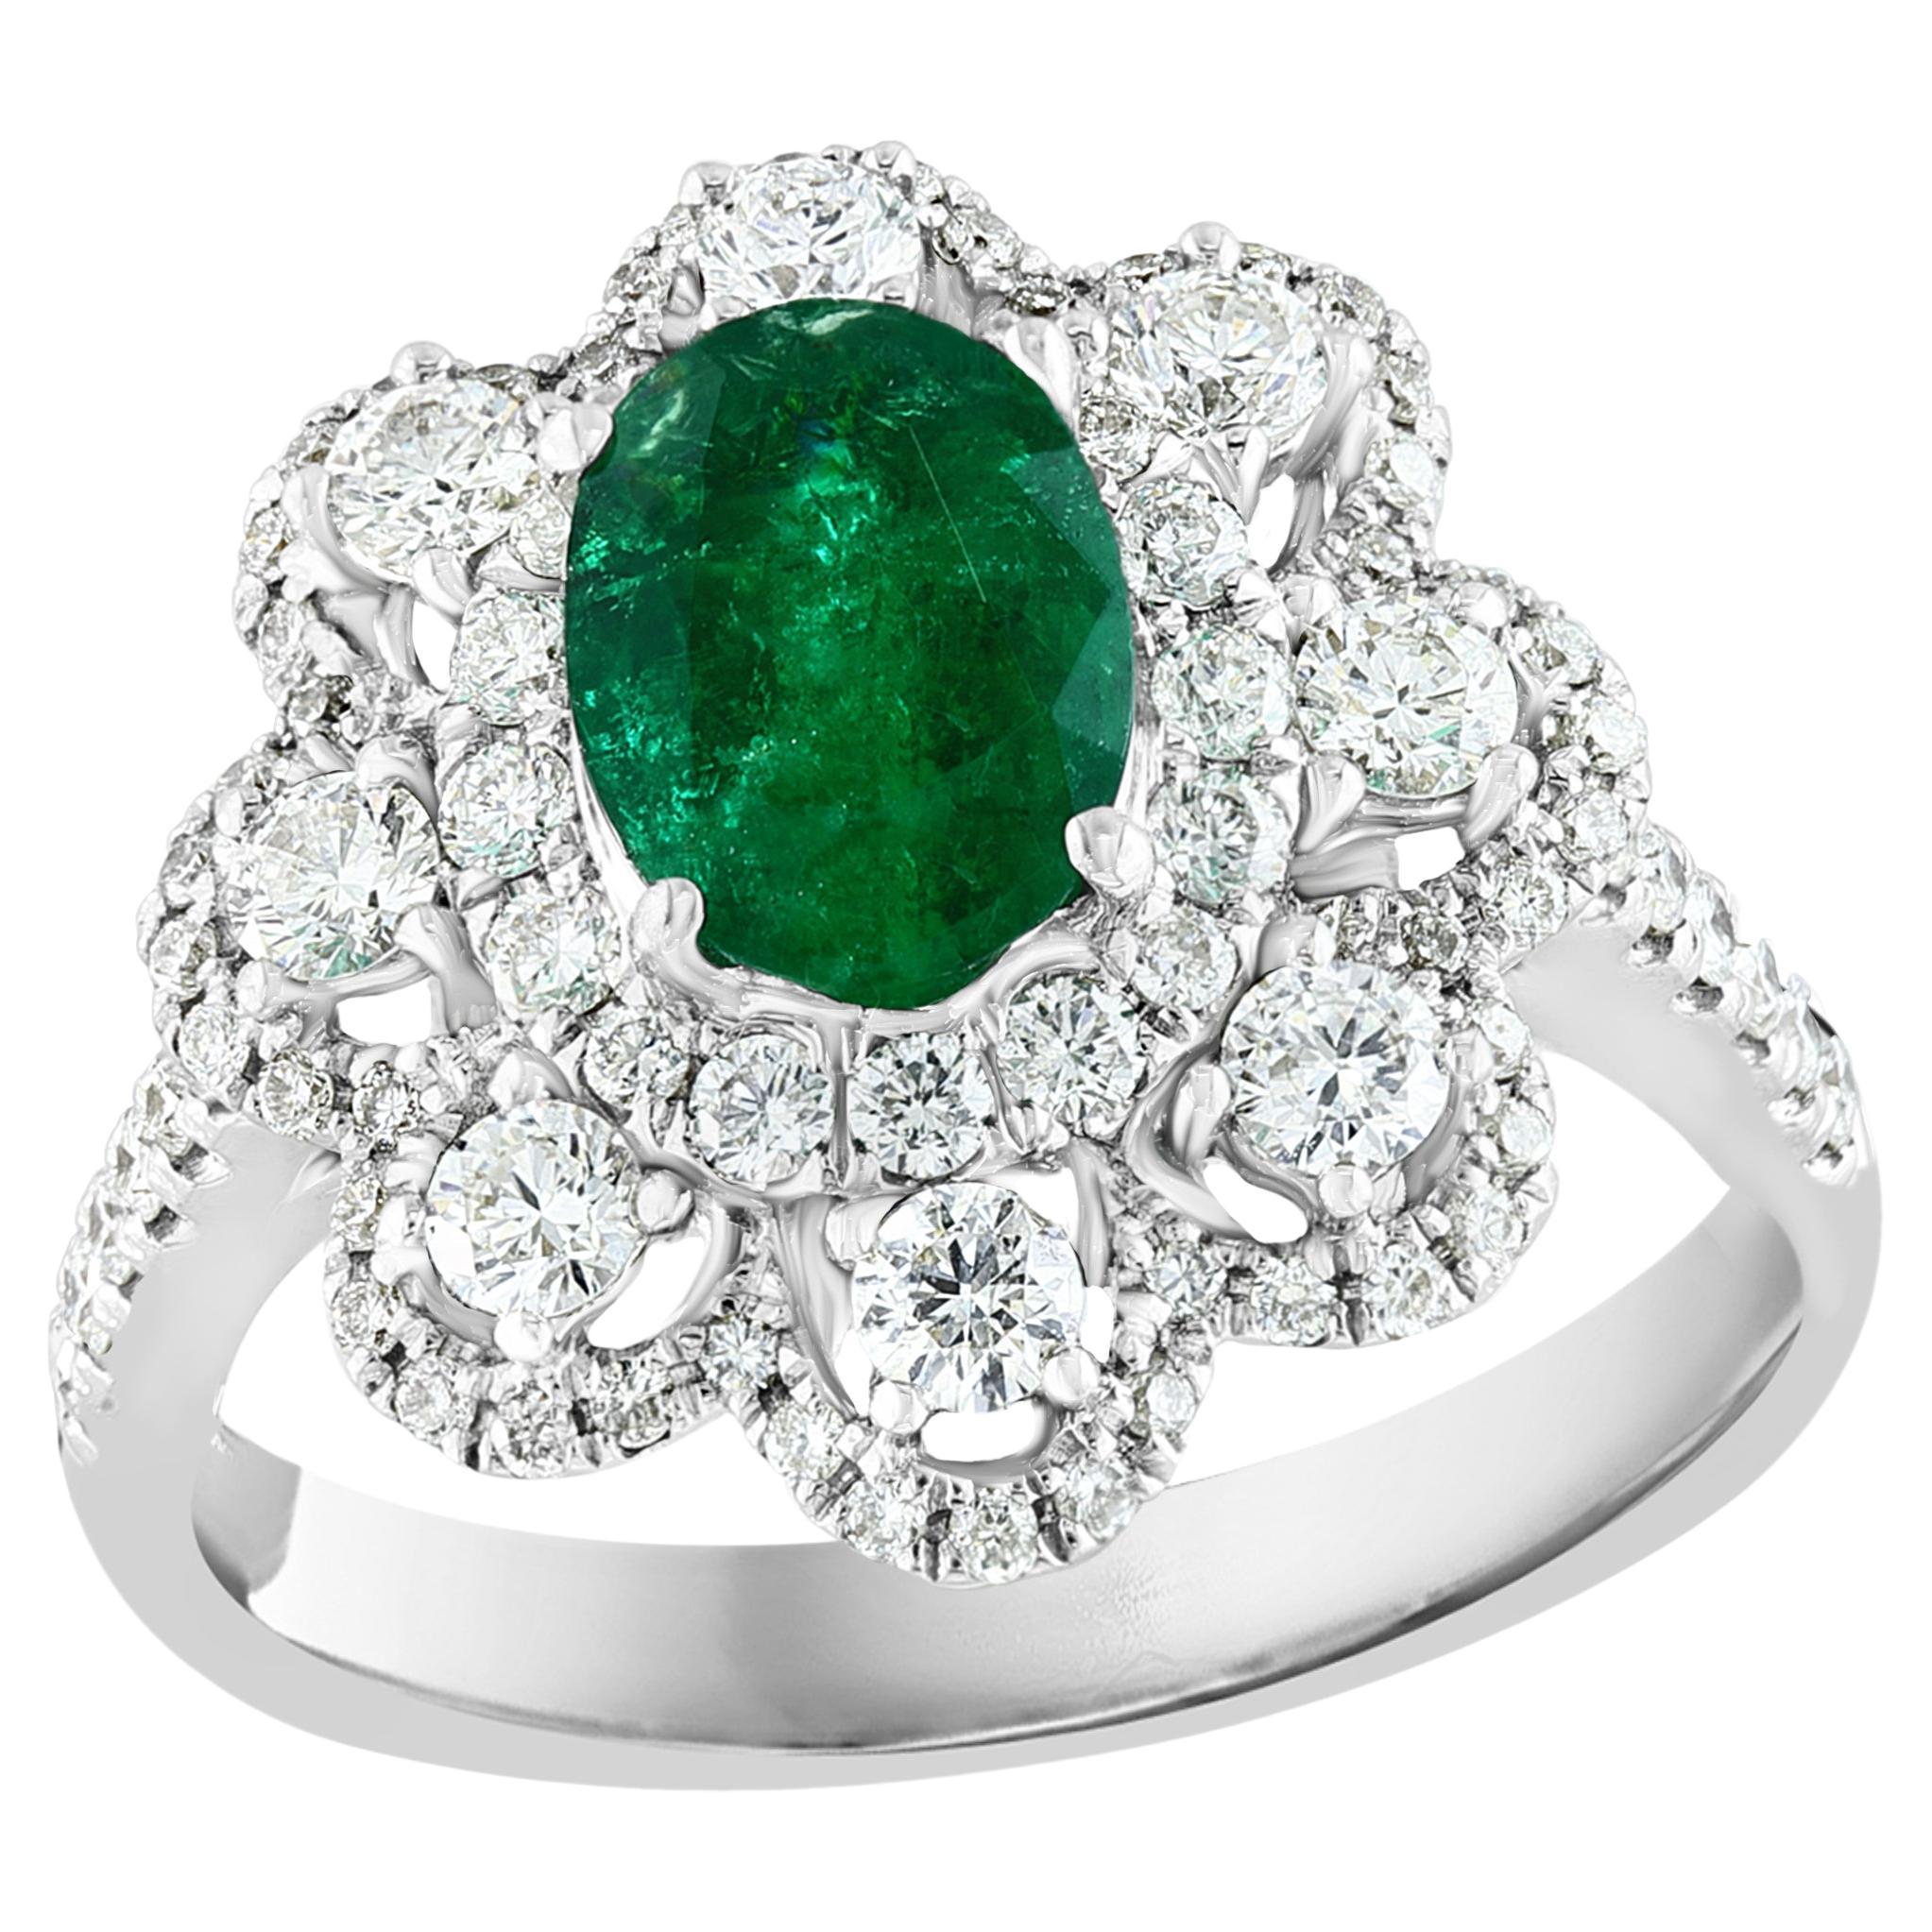 1.01 Carat Oval Emerald and Diamond Cocktail Flower Ring in 18K White Gold